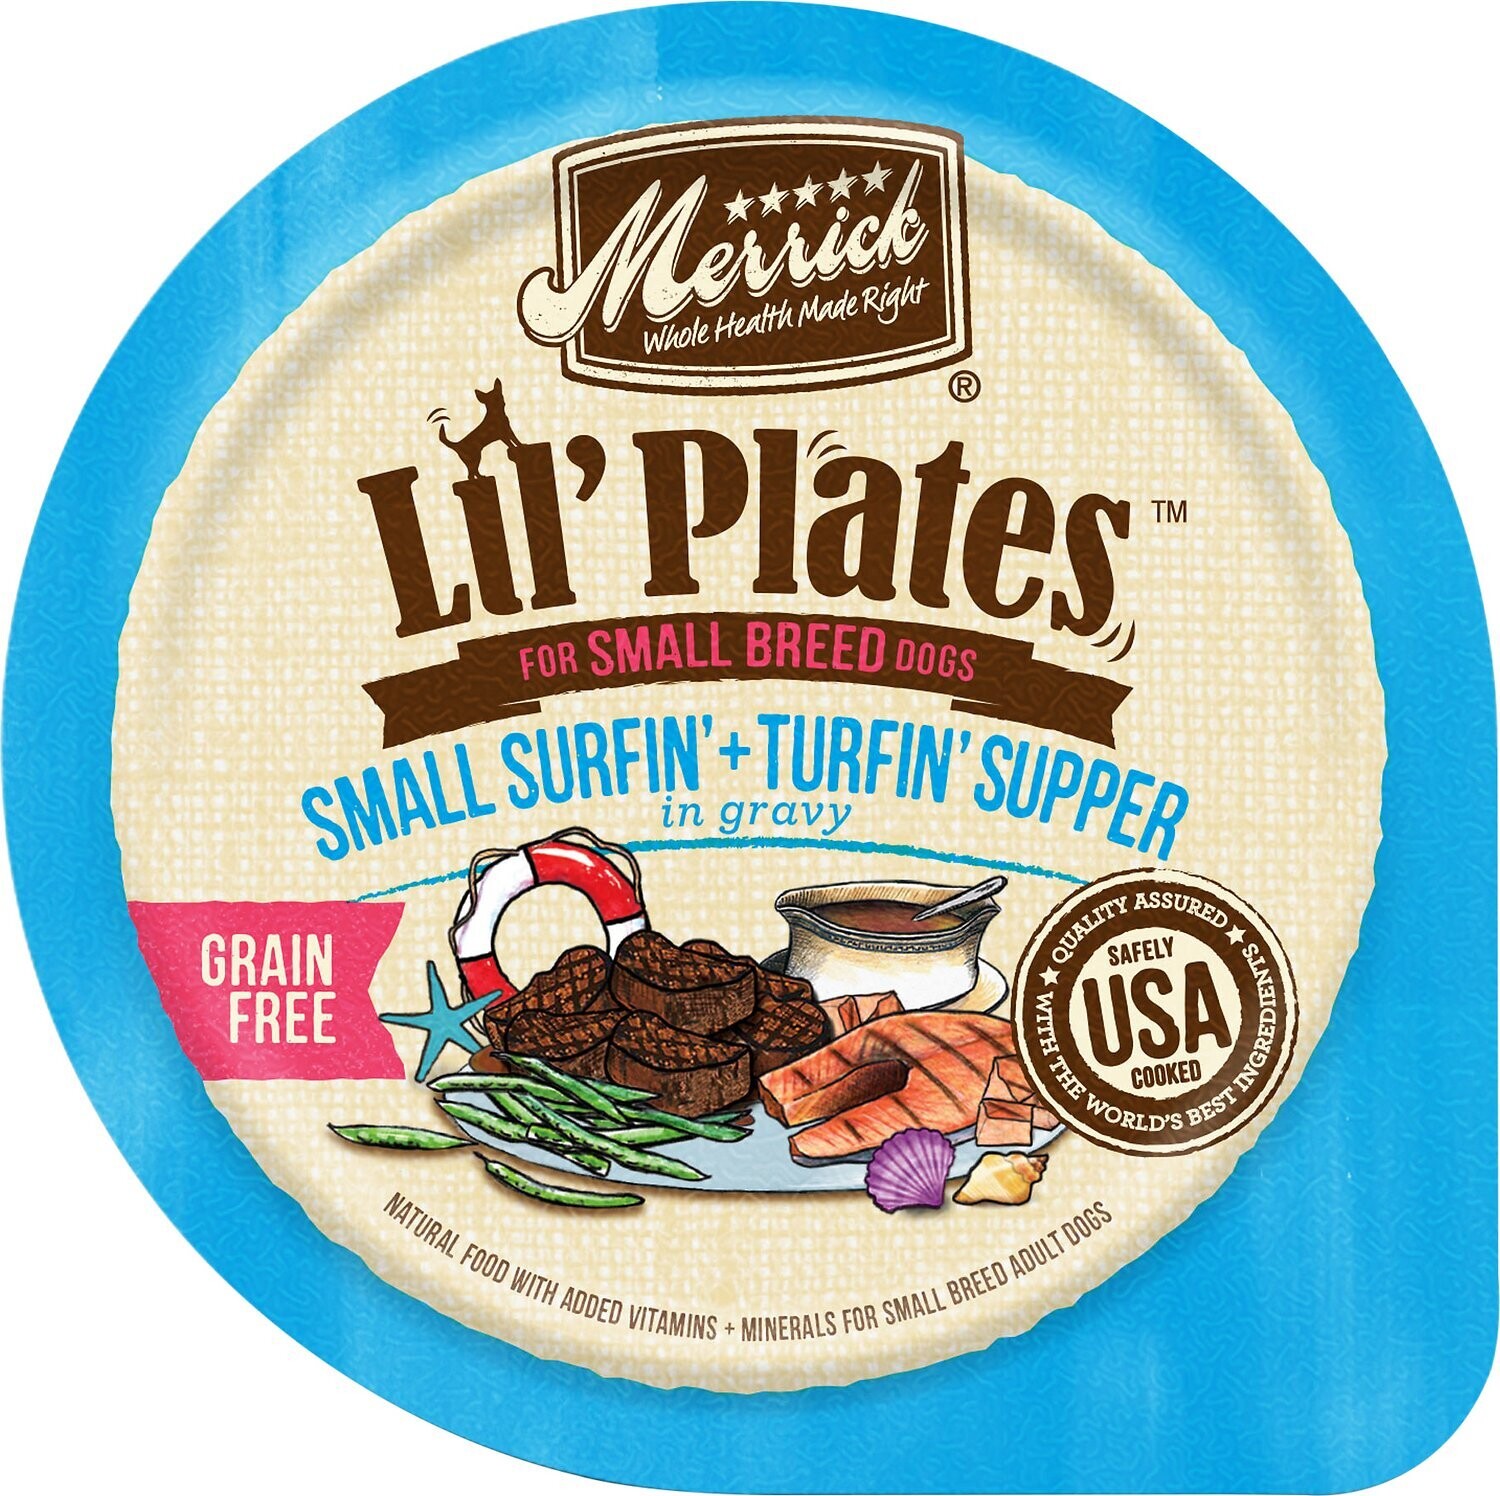 Merrick Lil' Plates Small Surfin' & Turfin' Supper cup 3.5oz 12/case